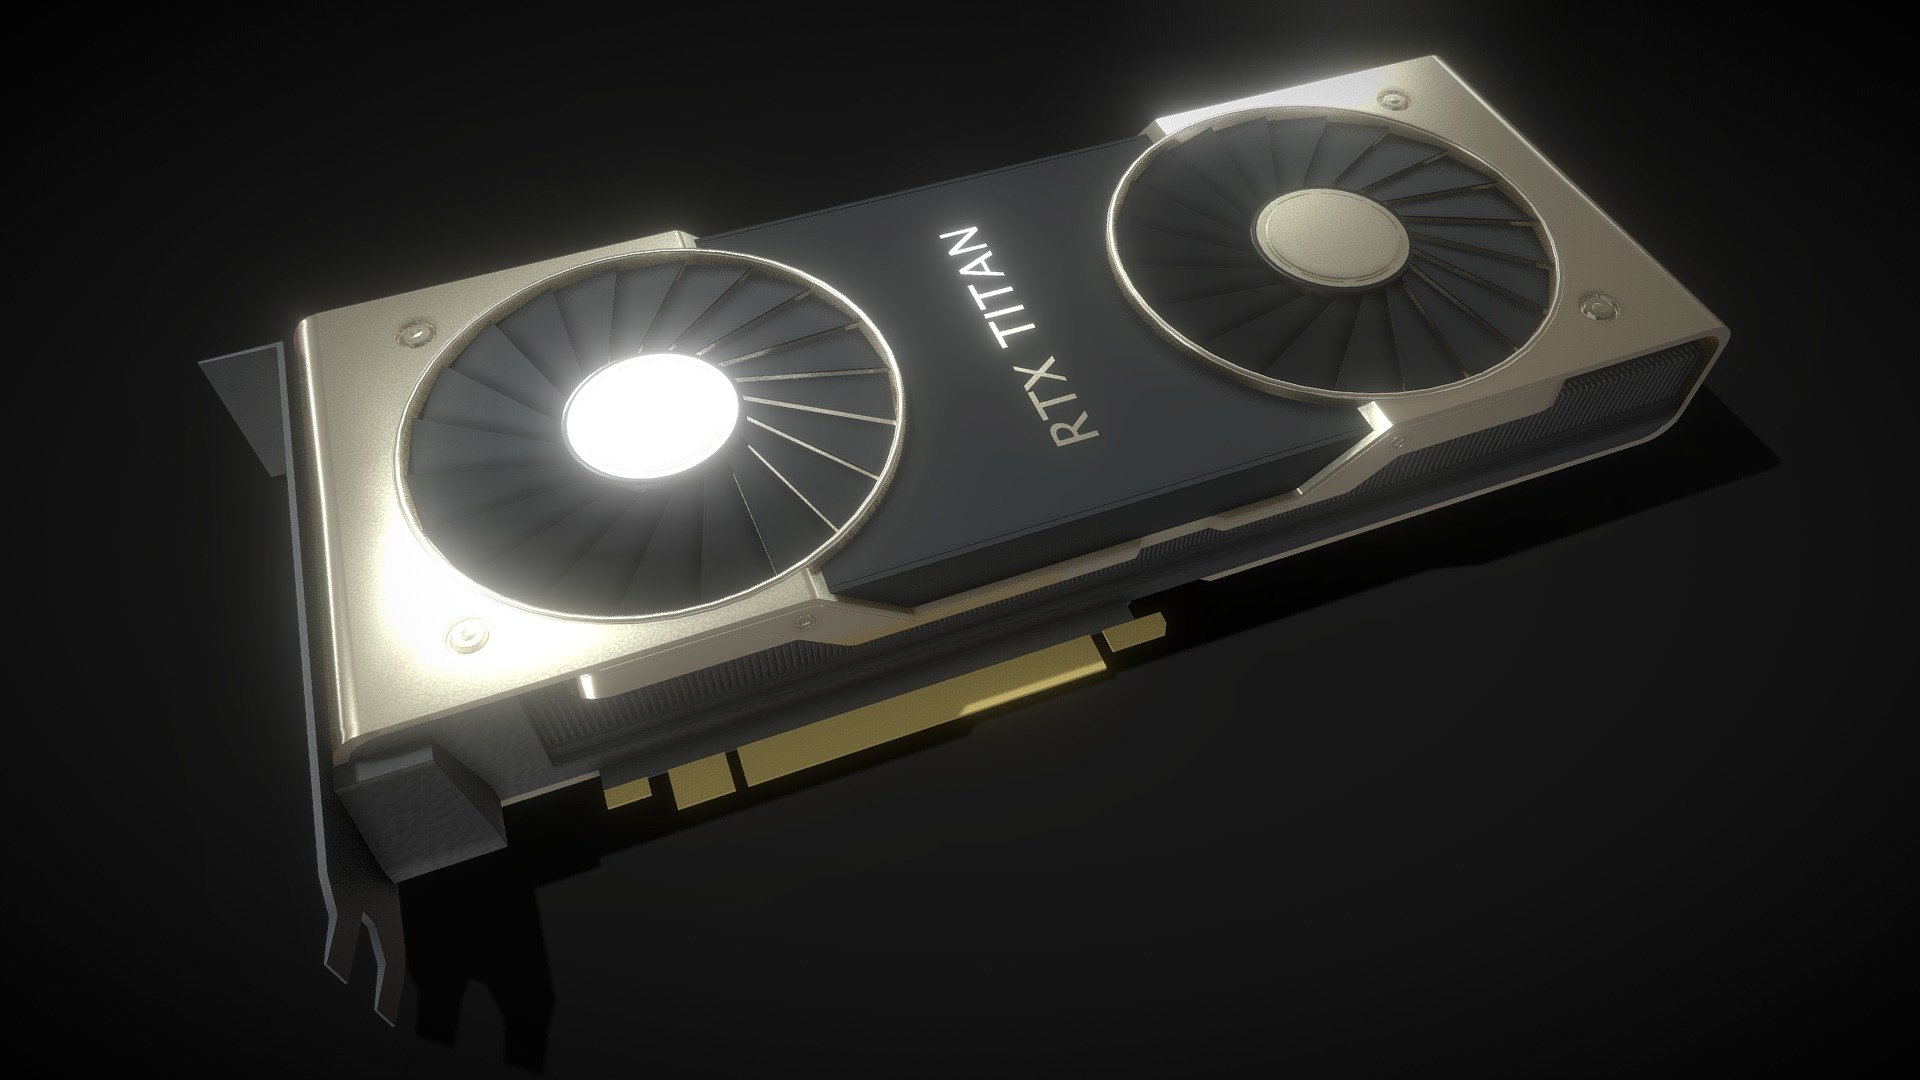 3D Model of the RTX Titan Graphics Card made in Maya and textured in Substance Painter.
This Model took about 6hours to complete 3d model